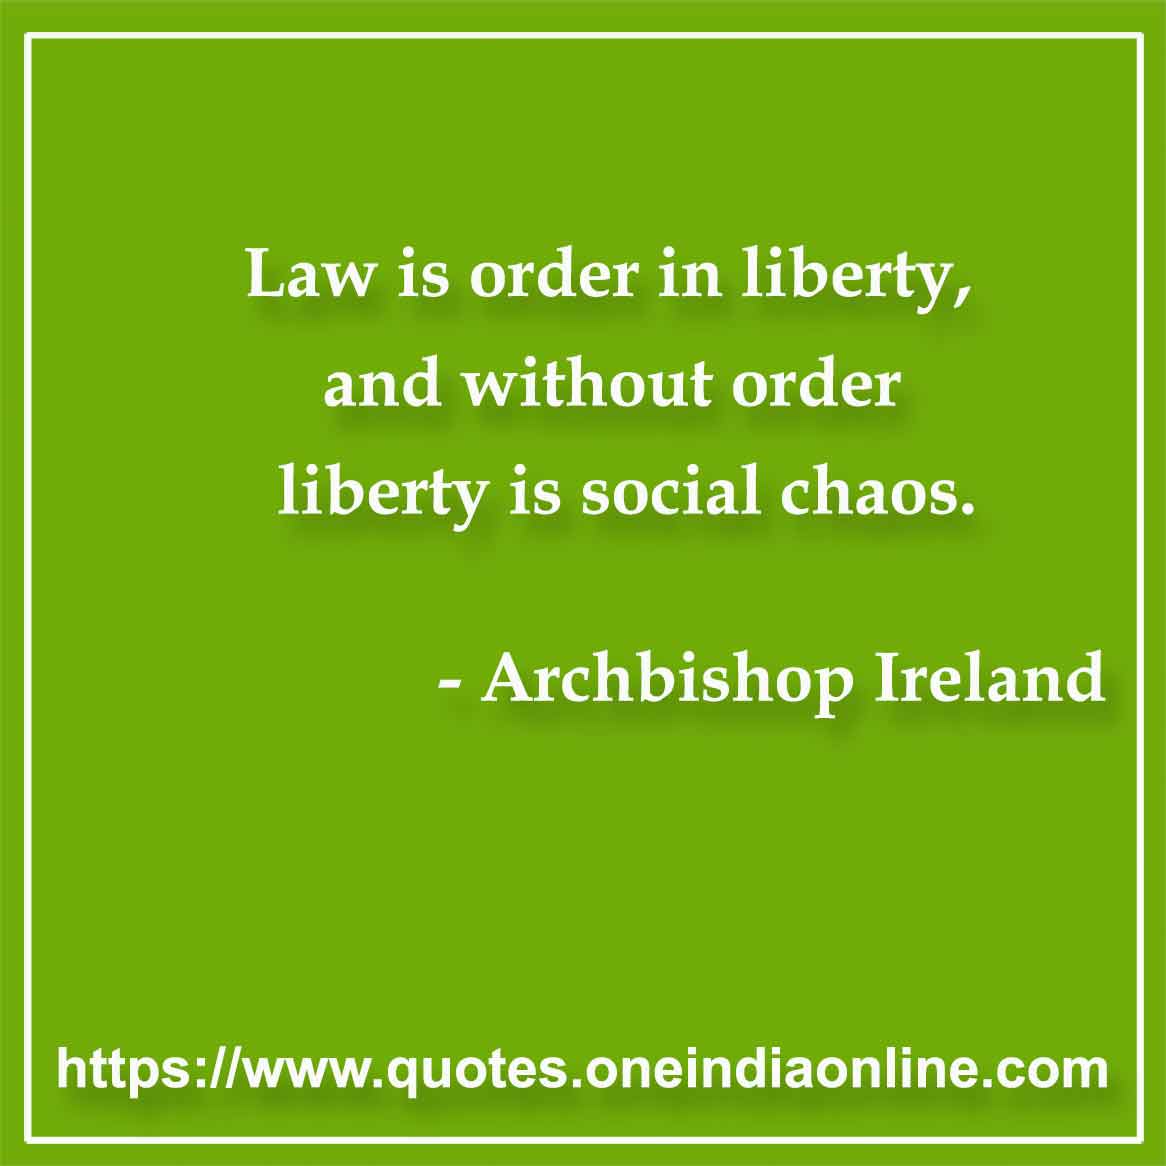 Law is order in liberty, and without order liberty is social chaos.

- Law Quotes Archbishop Ireland